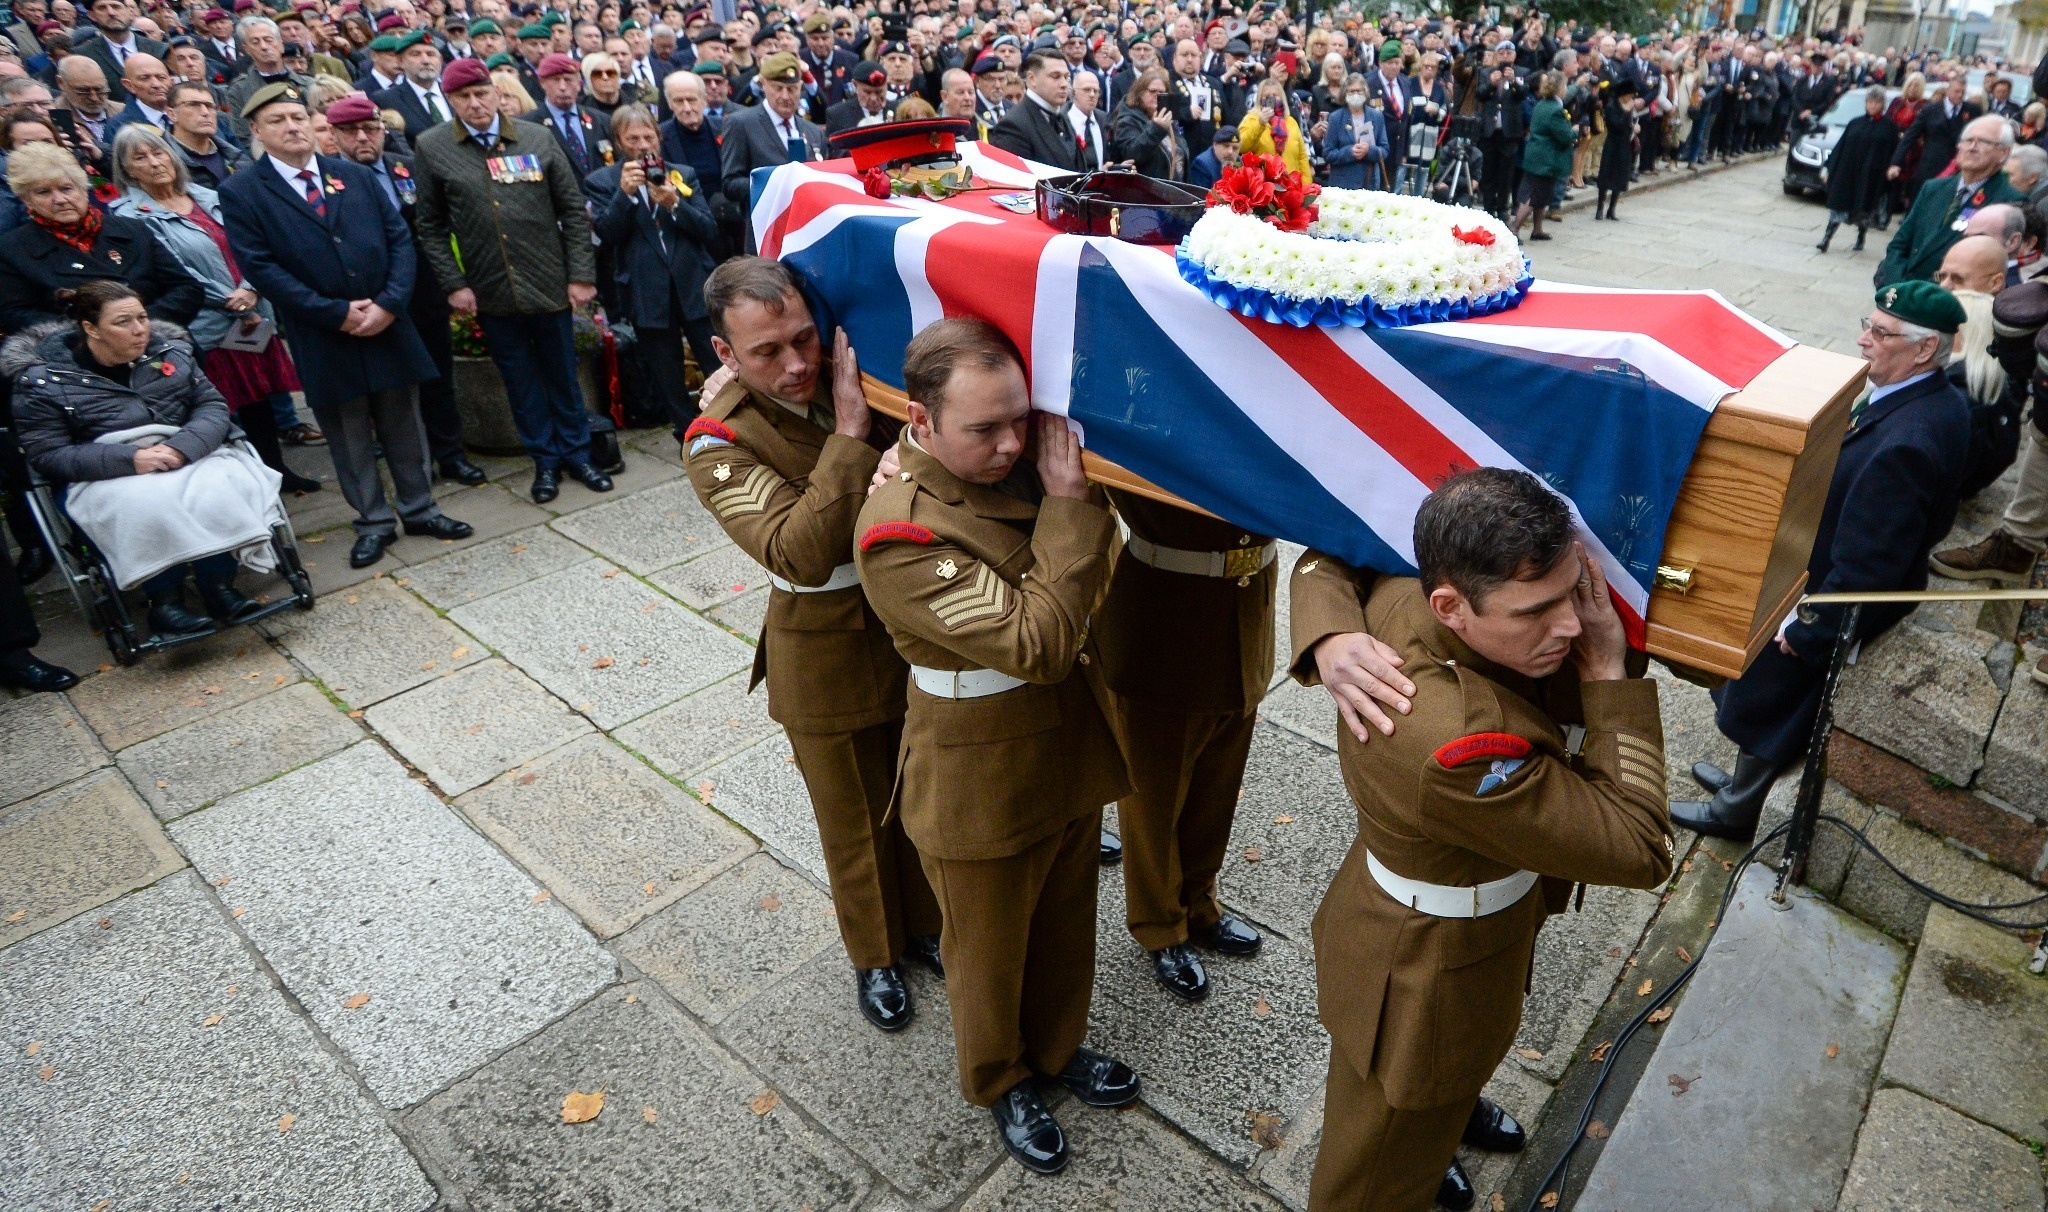 The coffin of Dennis Hutchings arrives at church (Photo: Finnbarr Webster / Getty)